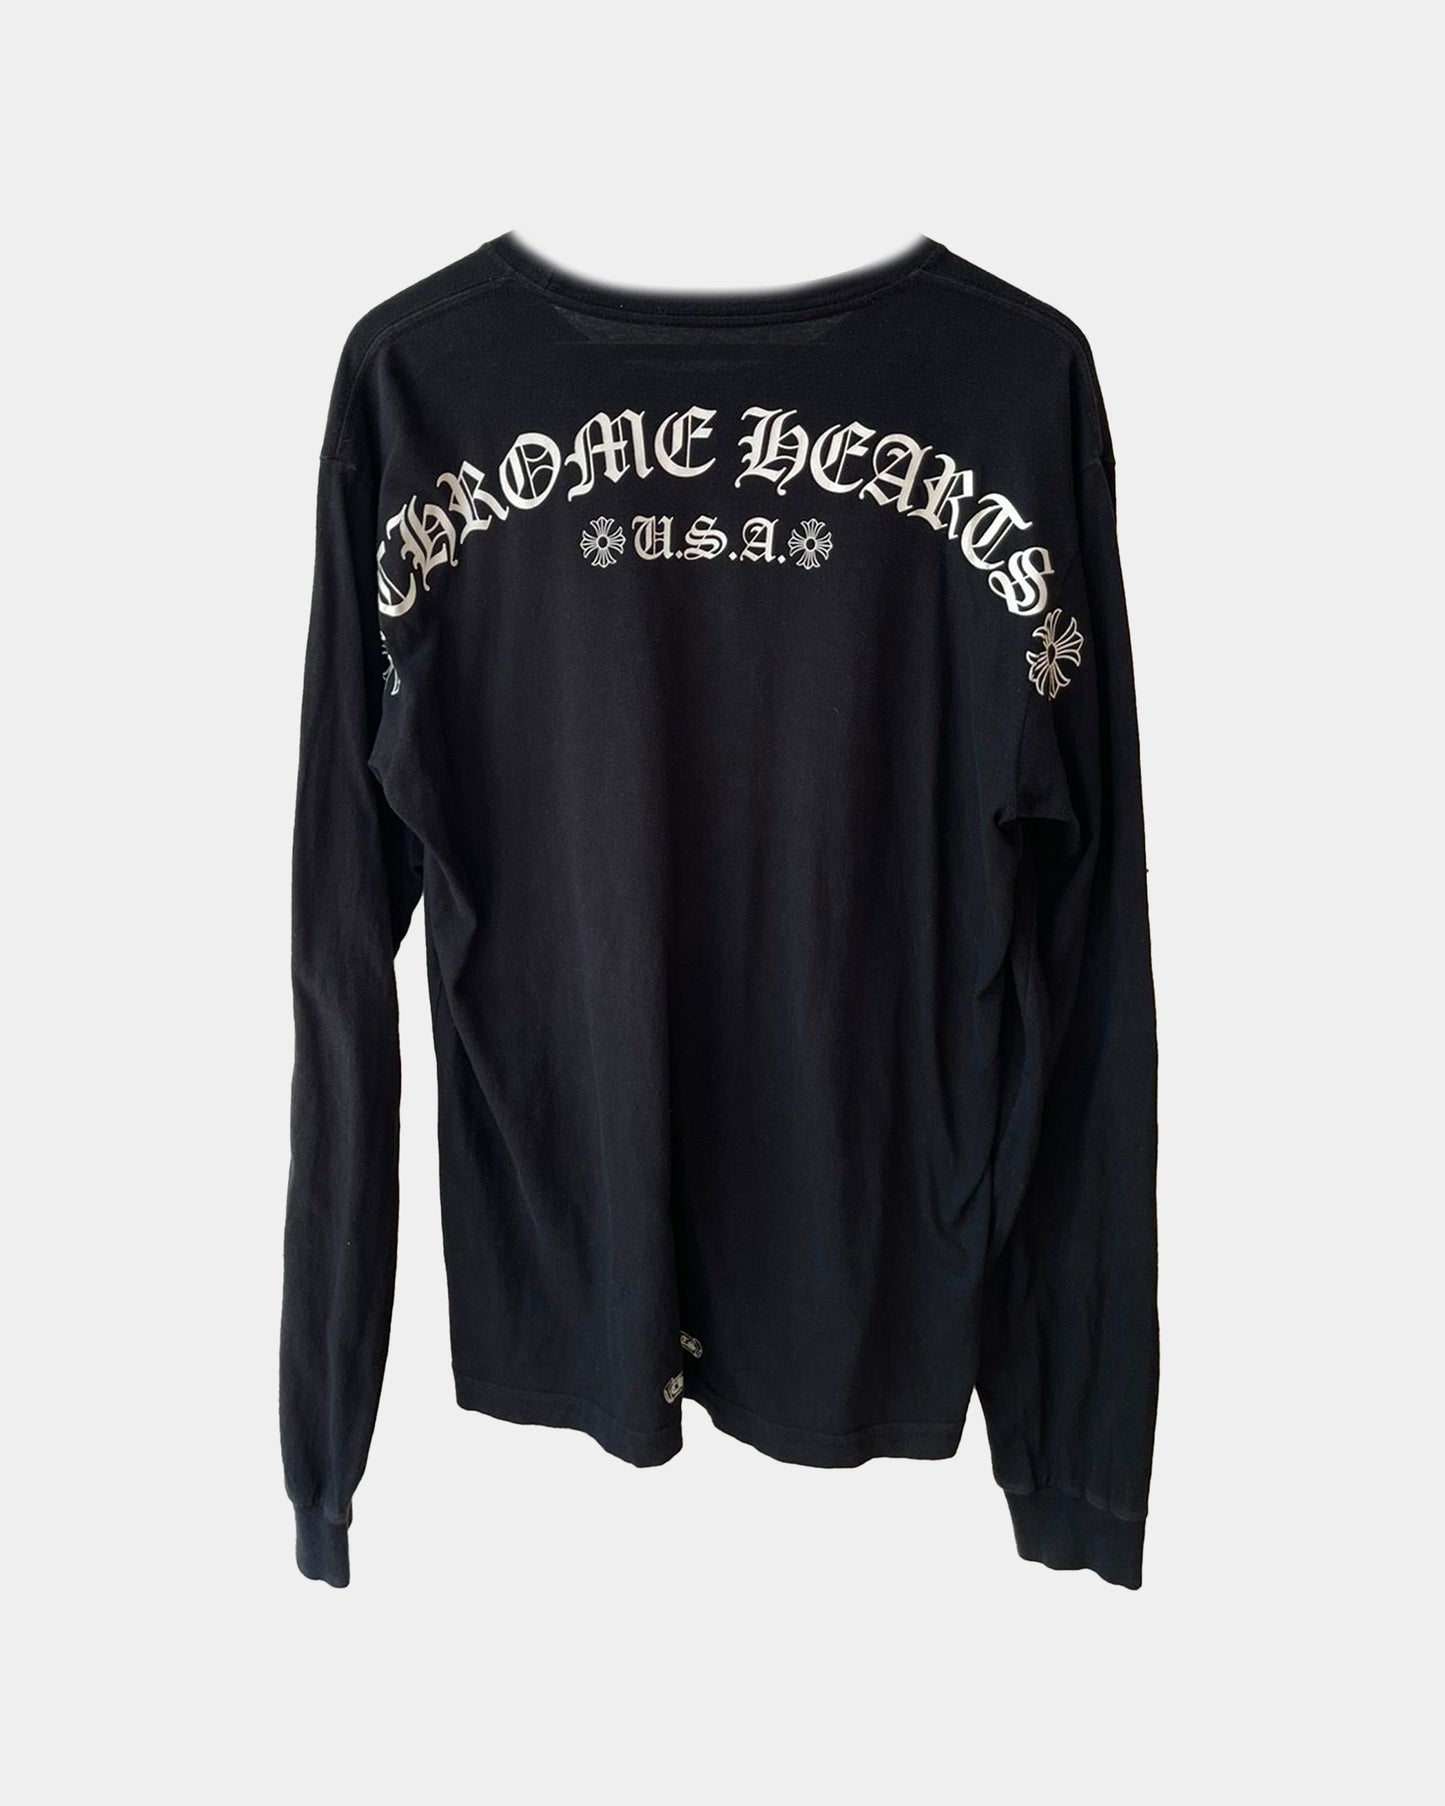 Chrome Hearts SPELL OUT ACROSS BACK Long Sleeve Shirt L